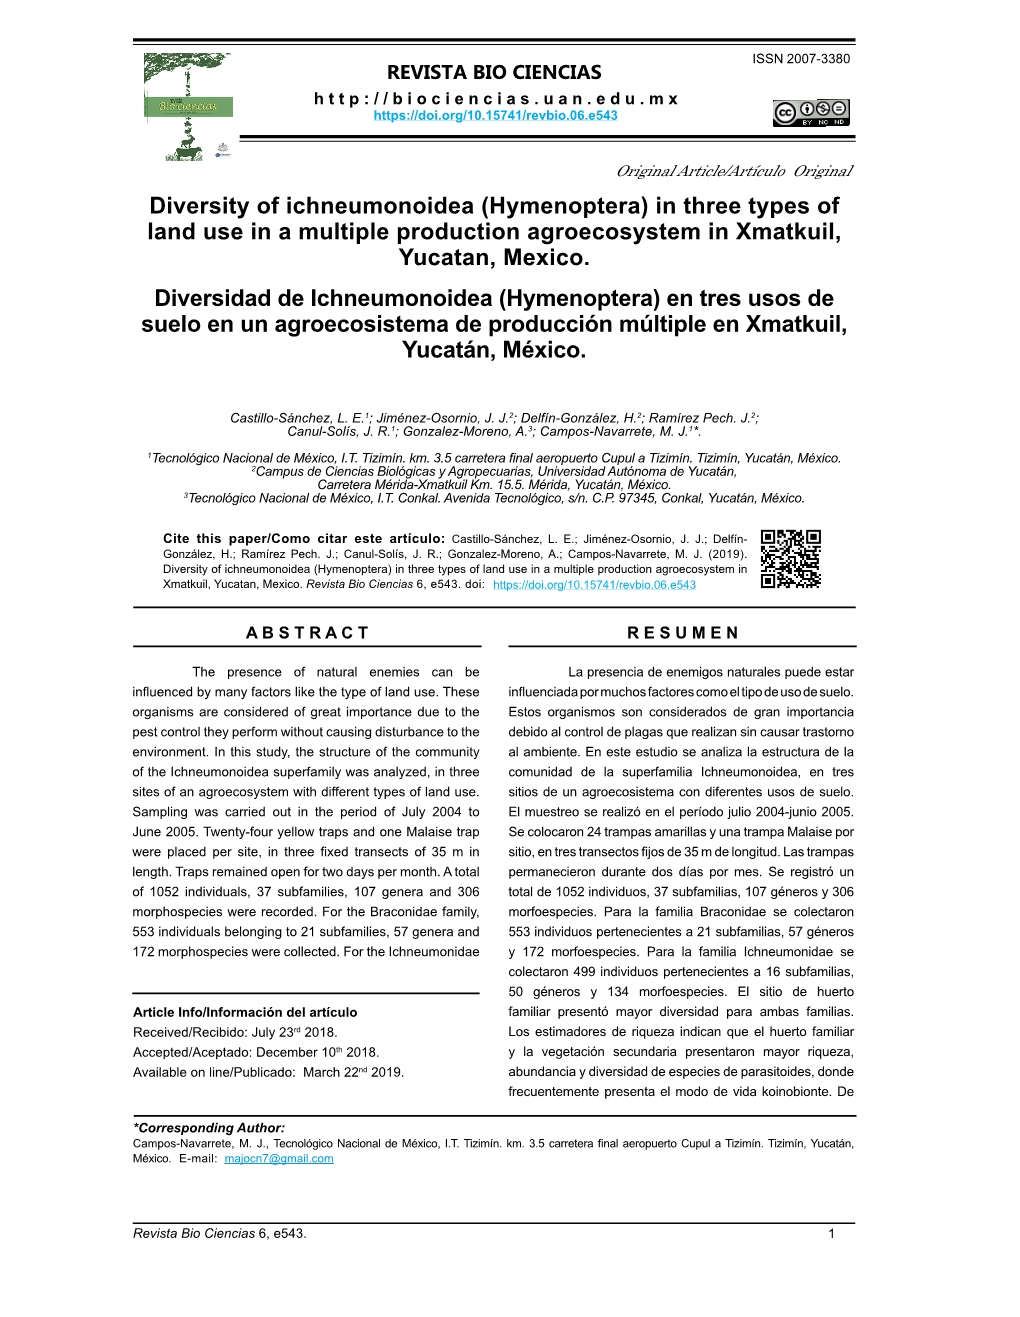 Diversity of Ichneumonoidea (Hymenoptera) in Three Types of Land Use in a Multiple Production Agroecosystem in Xmatkuil, Yucatan, Mexico